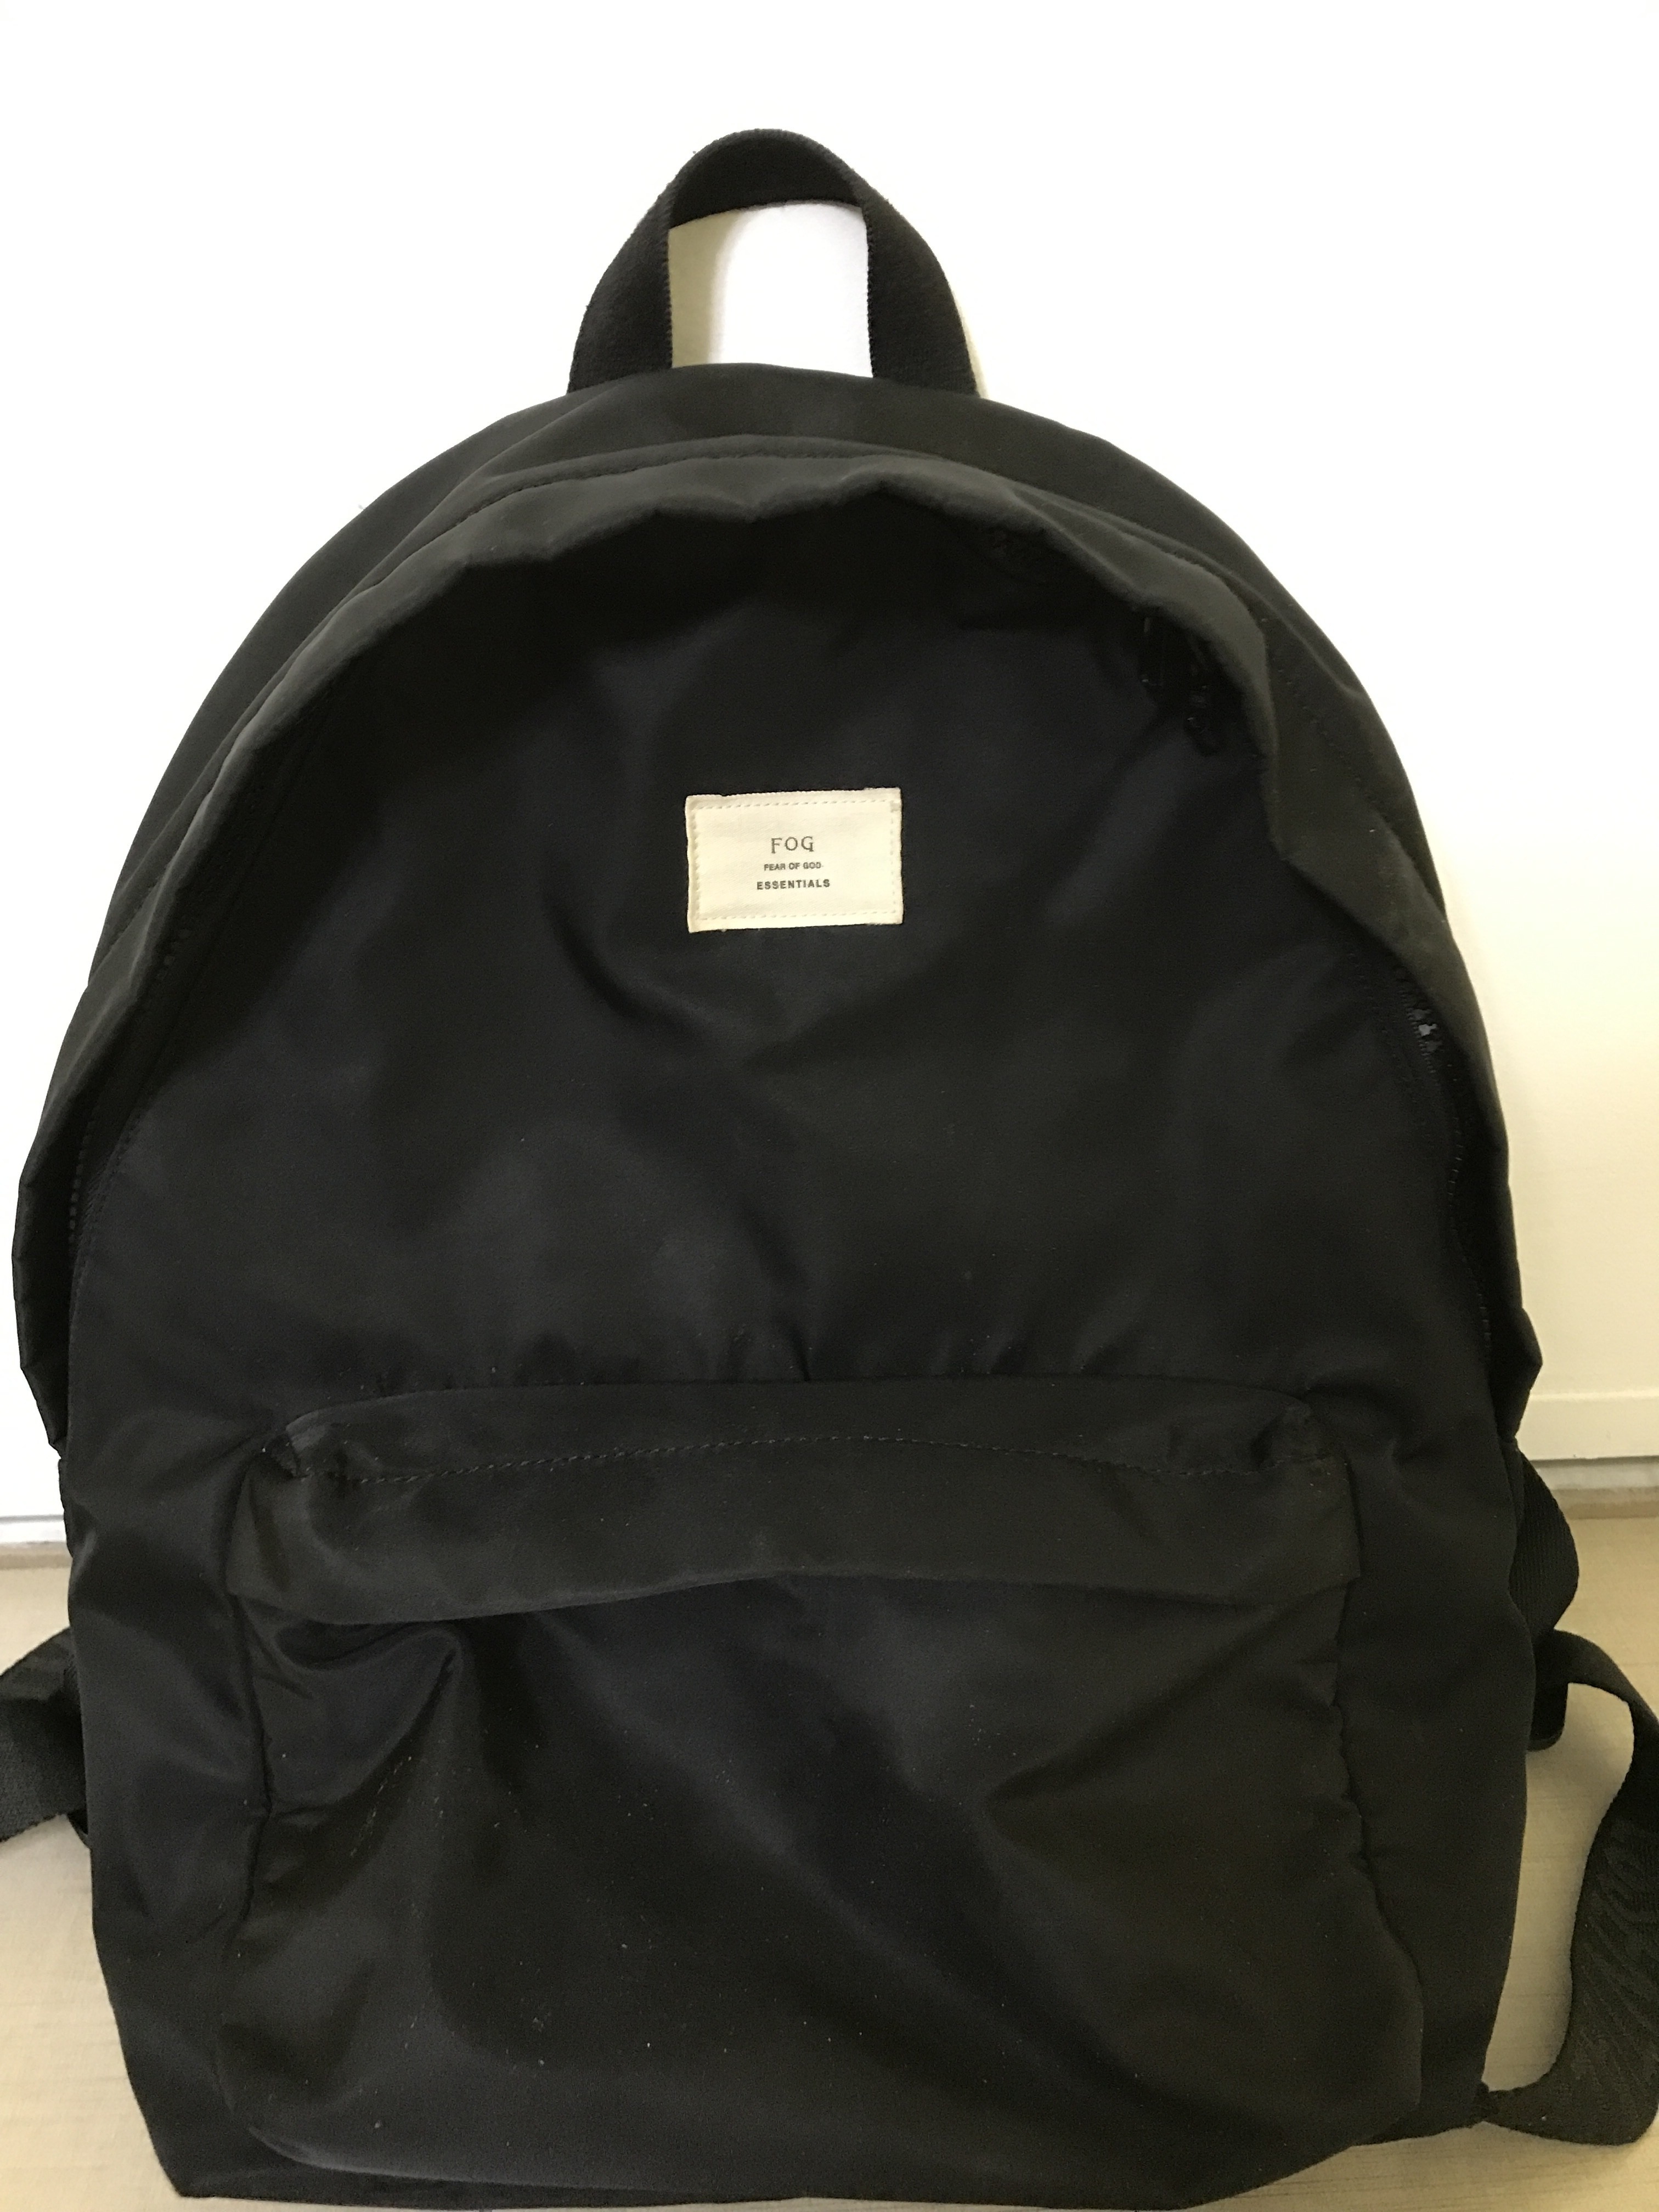 Fear of God Essentials Backpack - 11